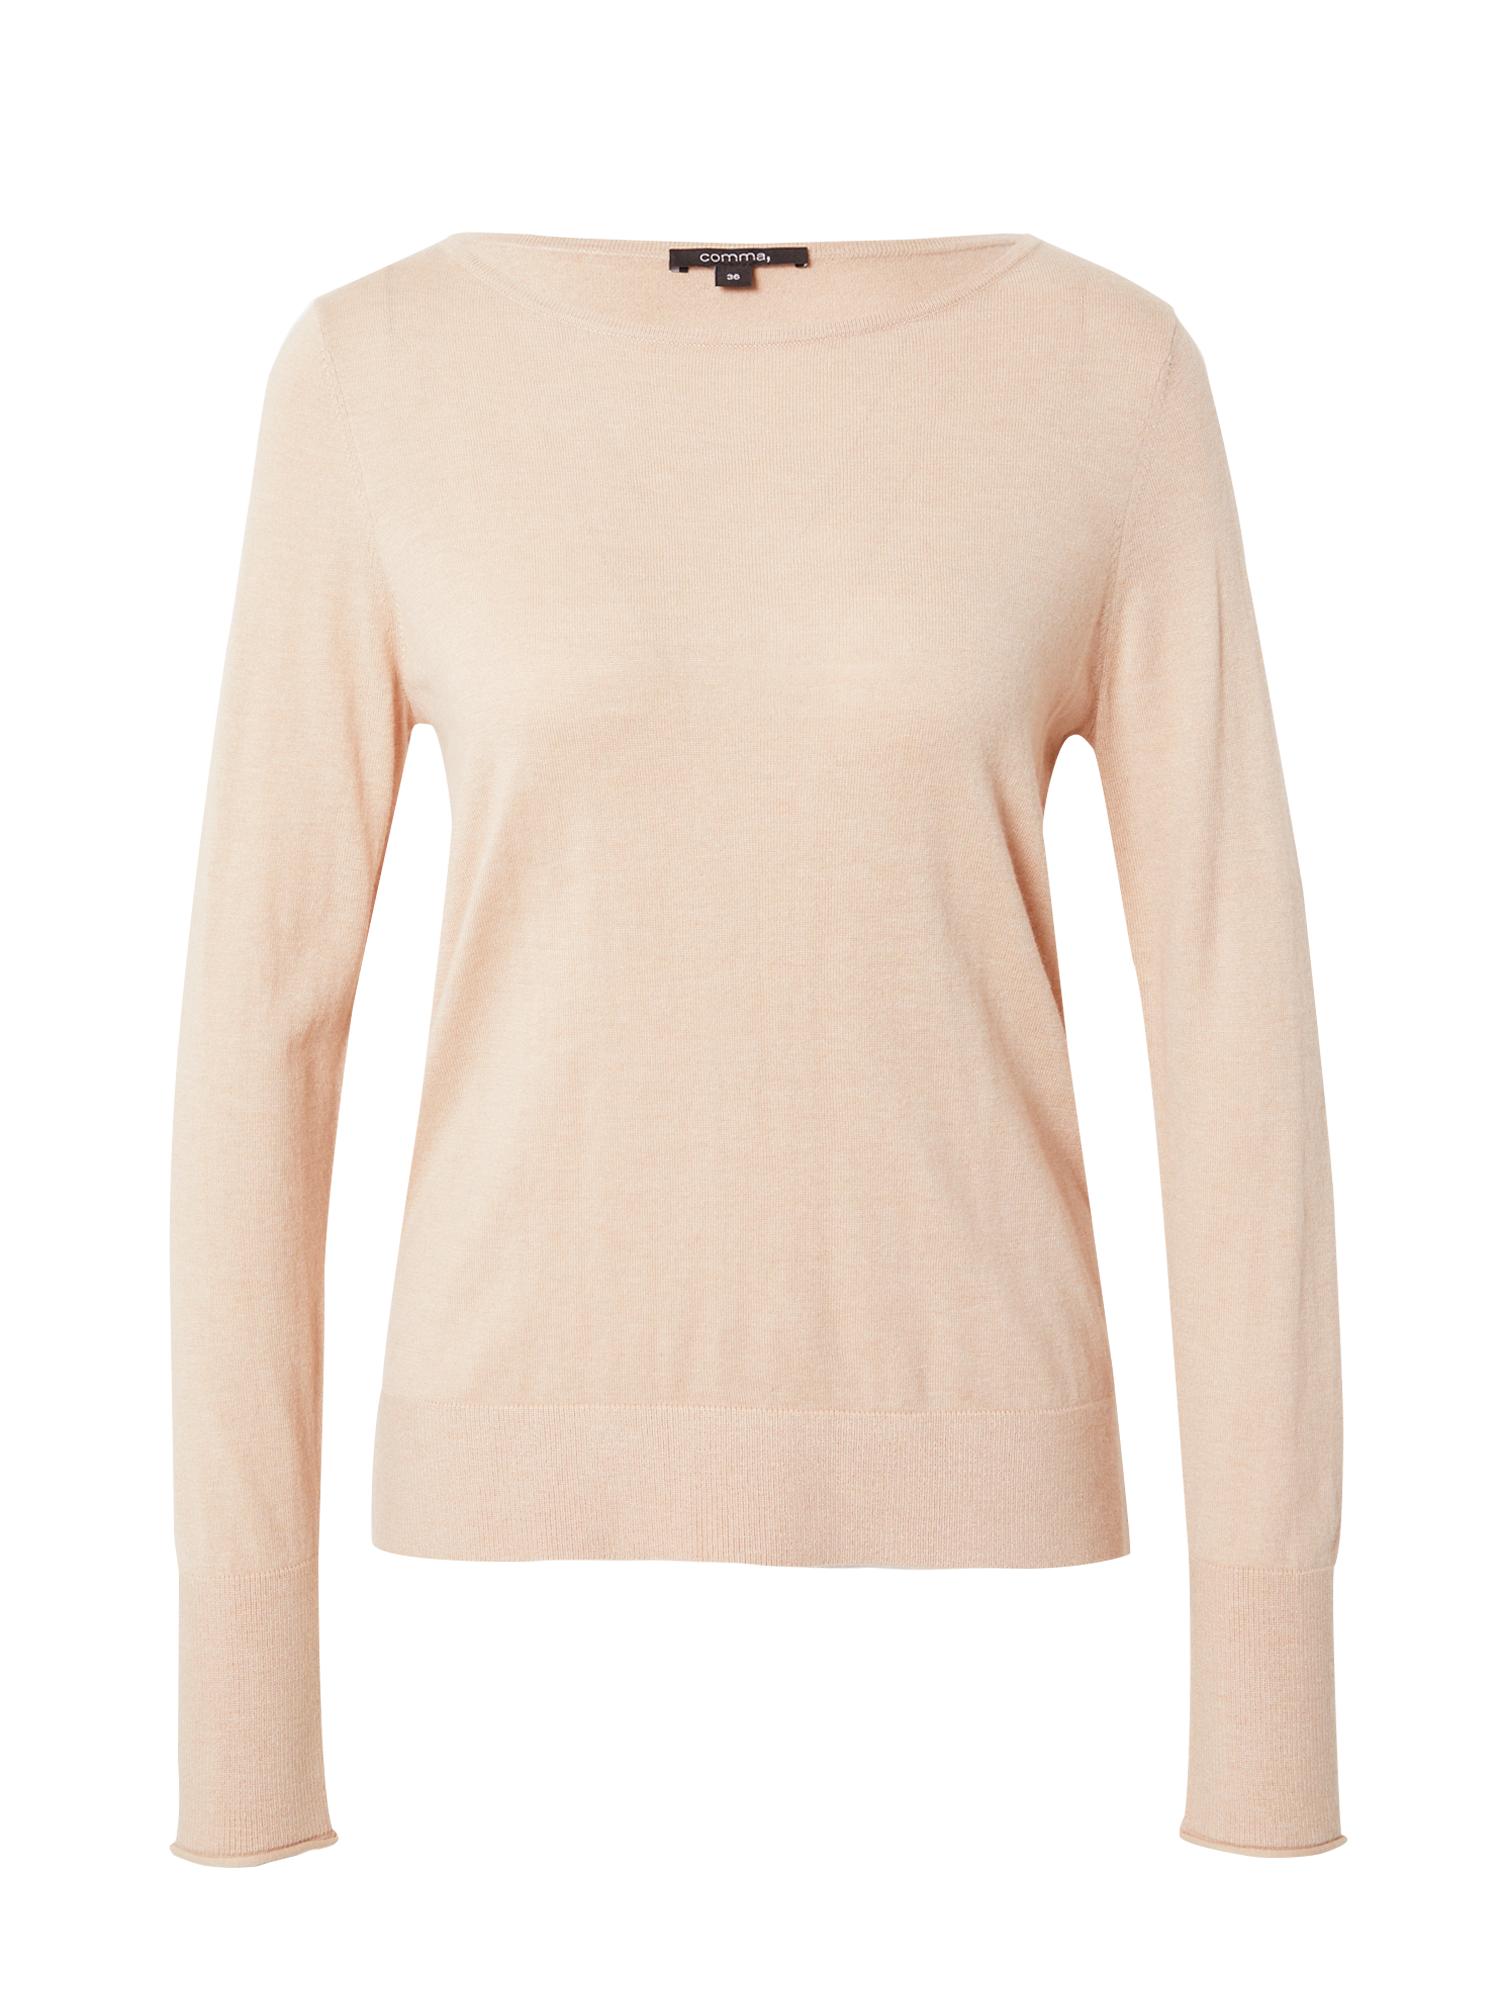 COMMA Pullover in Beige 